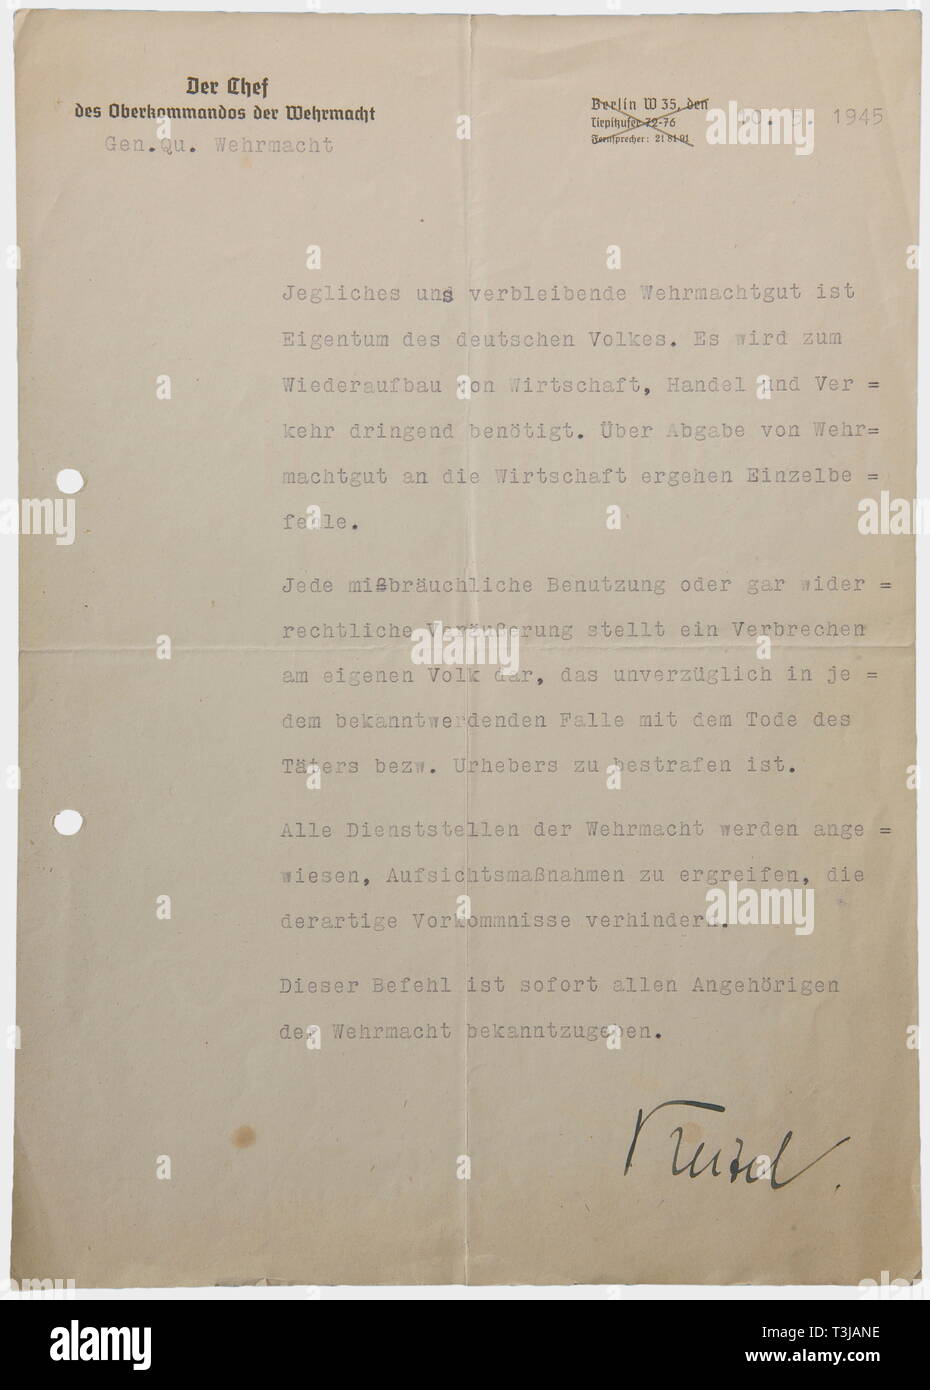 Field Marshal Wilhelm Keitel (1882 - 1946), last order of the High Command of the Wehrmacht Letterhead 'Chief of the High Command of the Wehrmacht - Gen. HQ Wehrmacht - 10th May 1945' - the Berlin address at the Tirpitz riverside crossed out - dated two days after the unconditional surrender in Berlin-Karlshorst by the Chief of the High Command of the Wehrmacht: 'All Wehrmacht commodities still remaining in our hands are the property of the German people. They are required to rebuild the economy, trade and infrastructure ... any improper use or illegal sale is regarded as a, Editorial-Use-Only Stock Photo